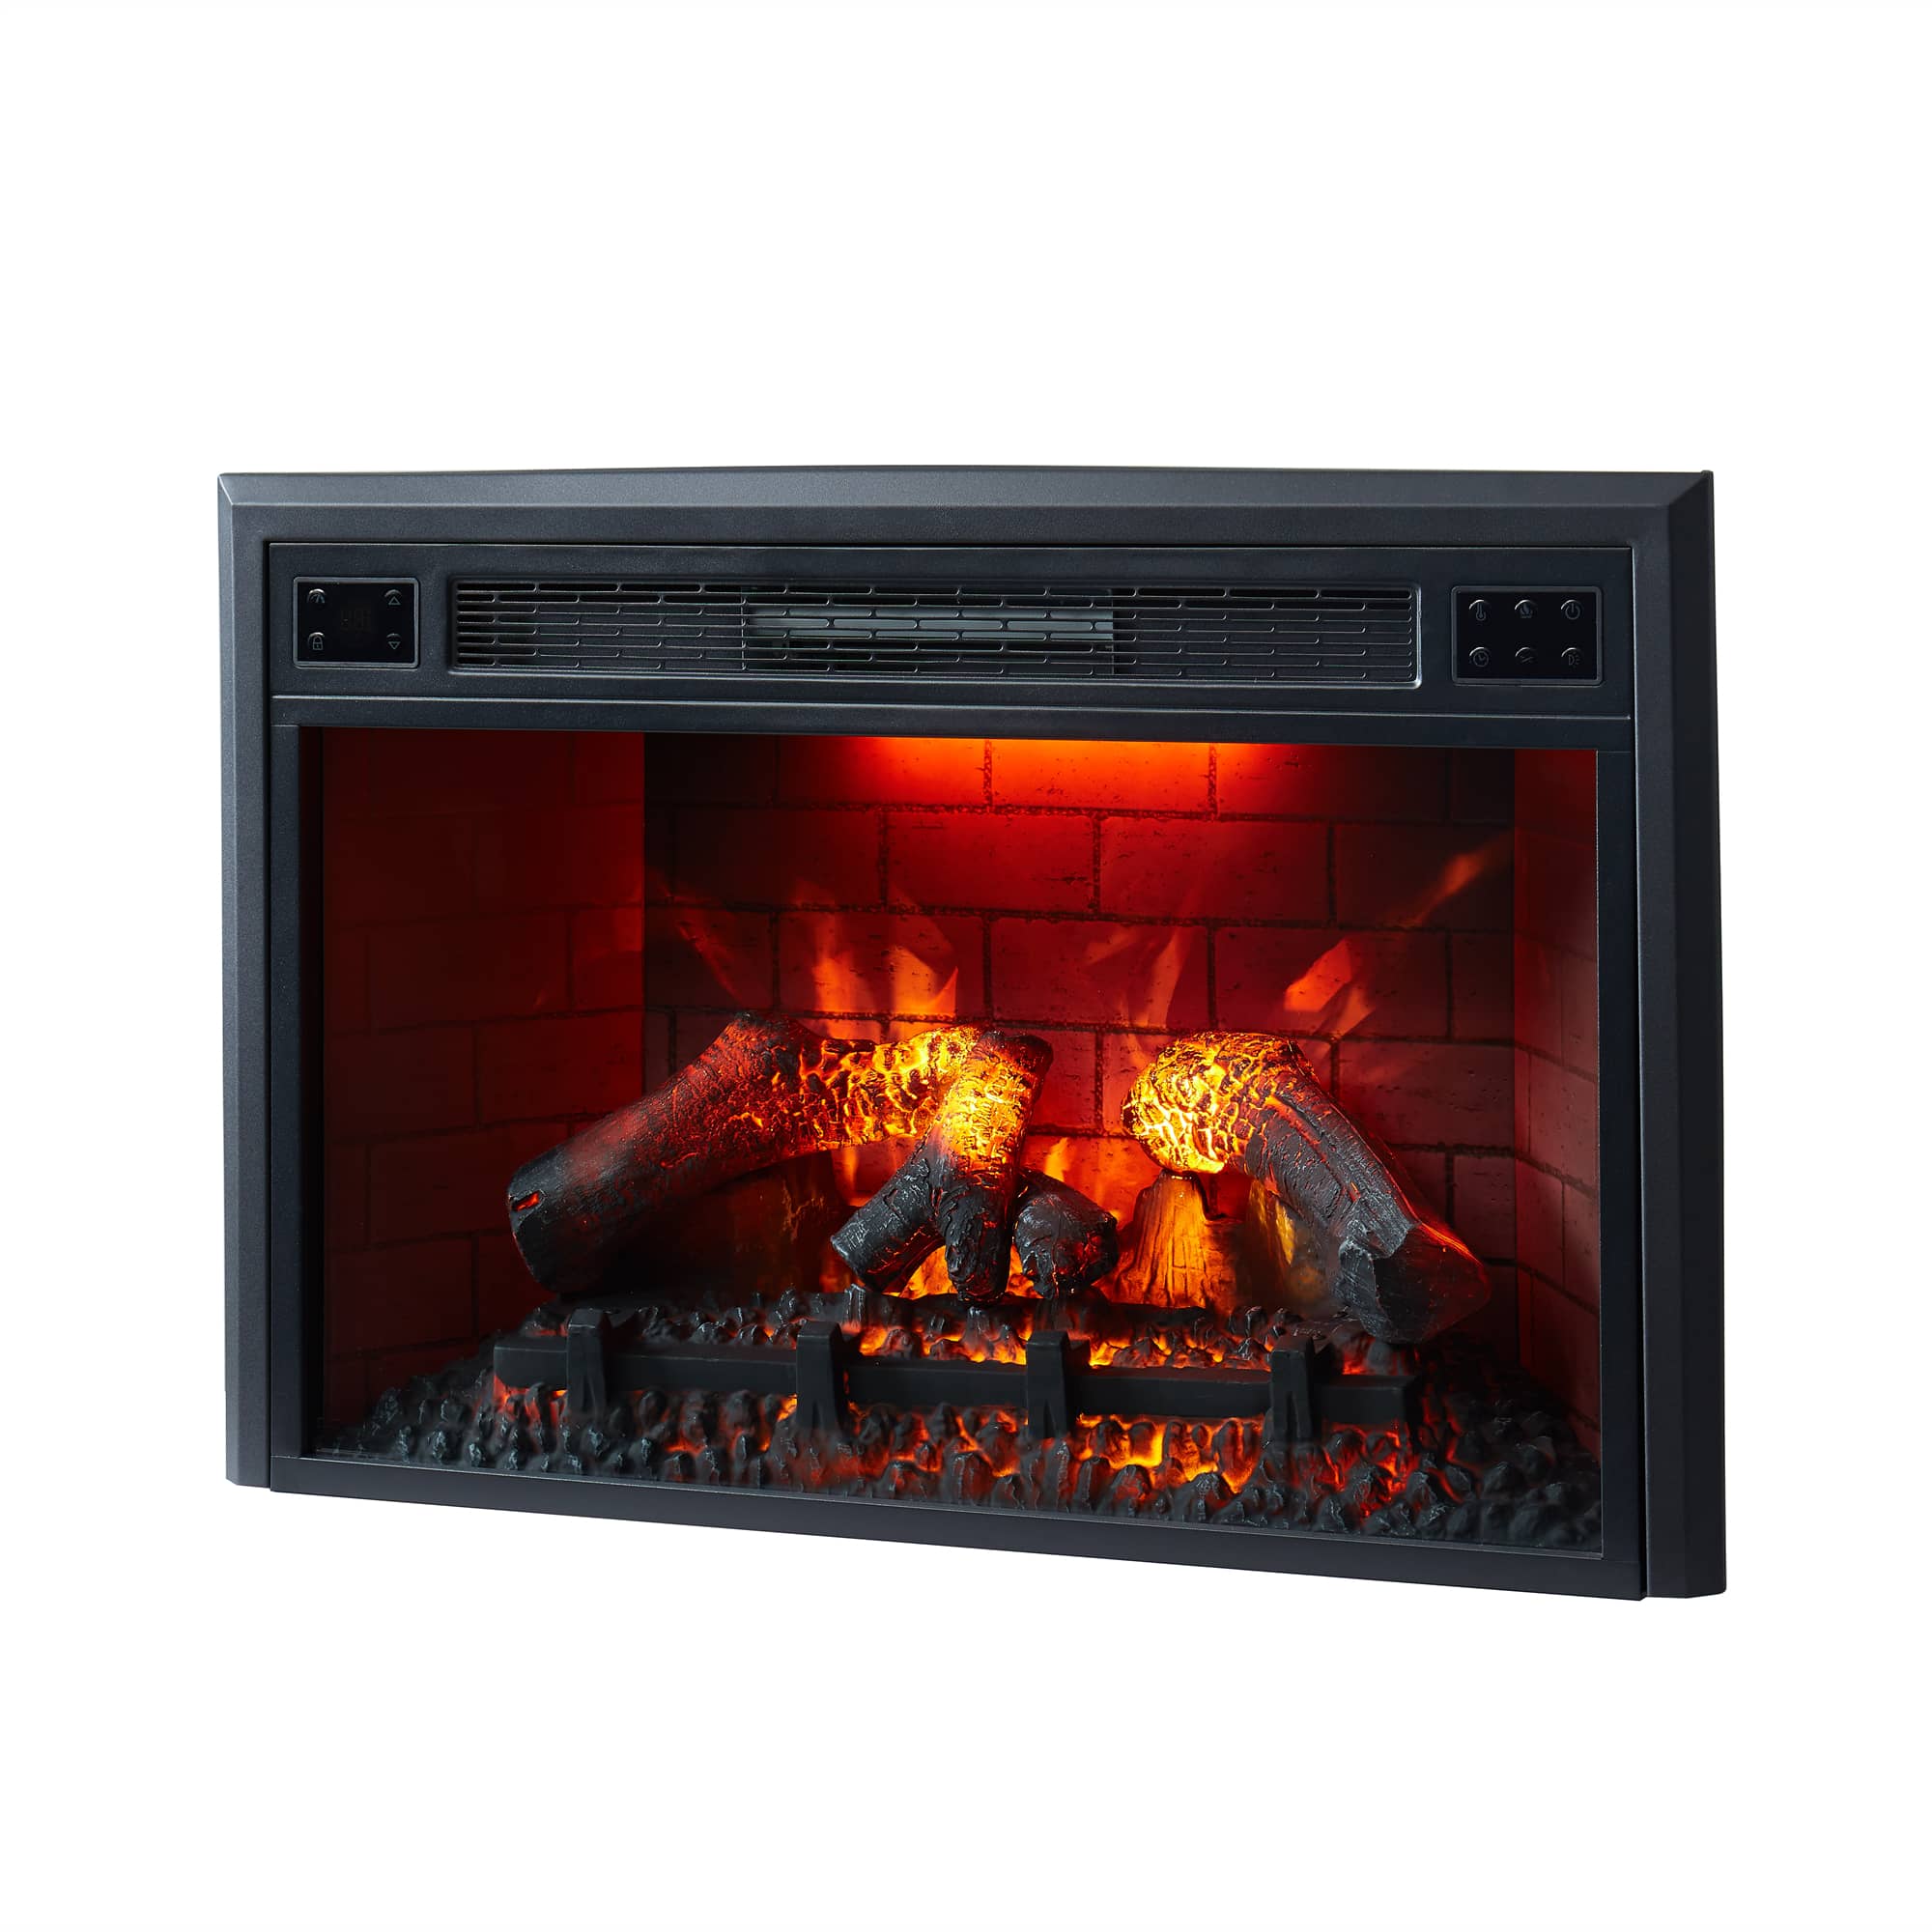 CASAINC 35 in. Built-in Ventless Electric Fireplace Insert with LED Light 